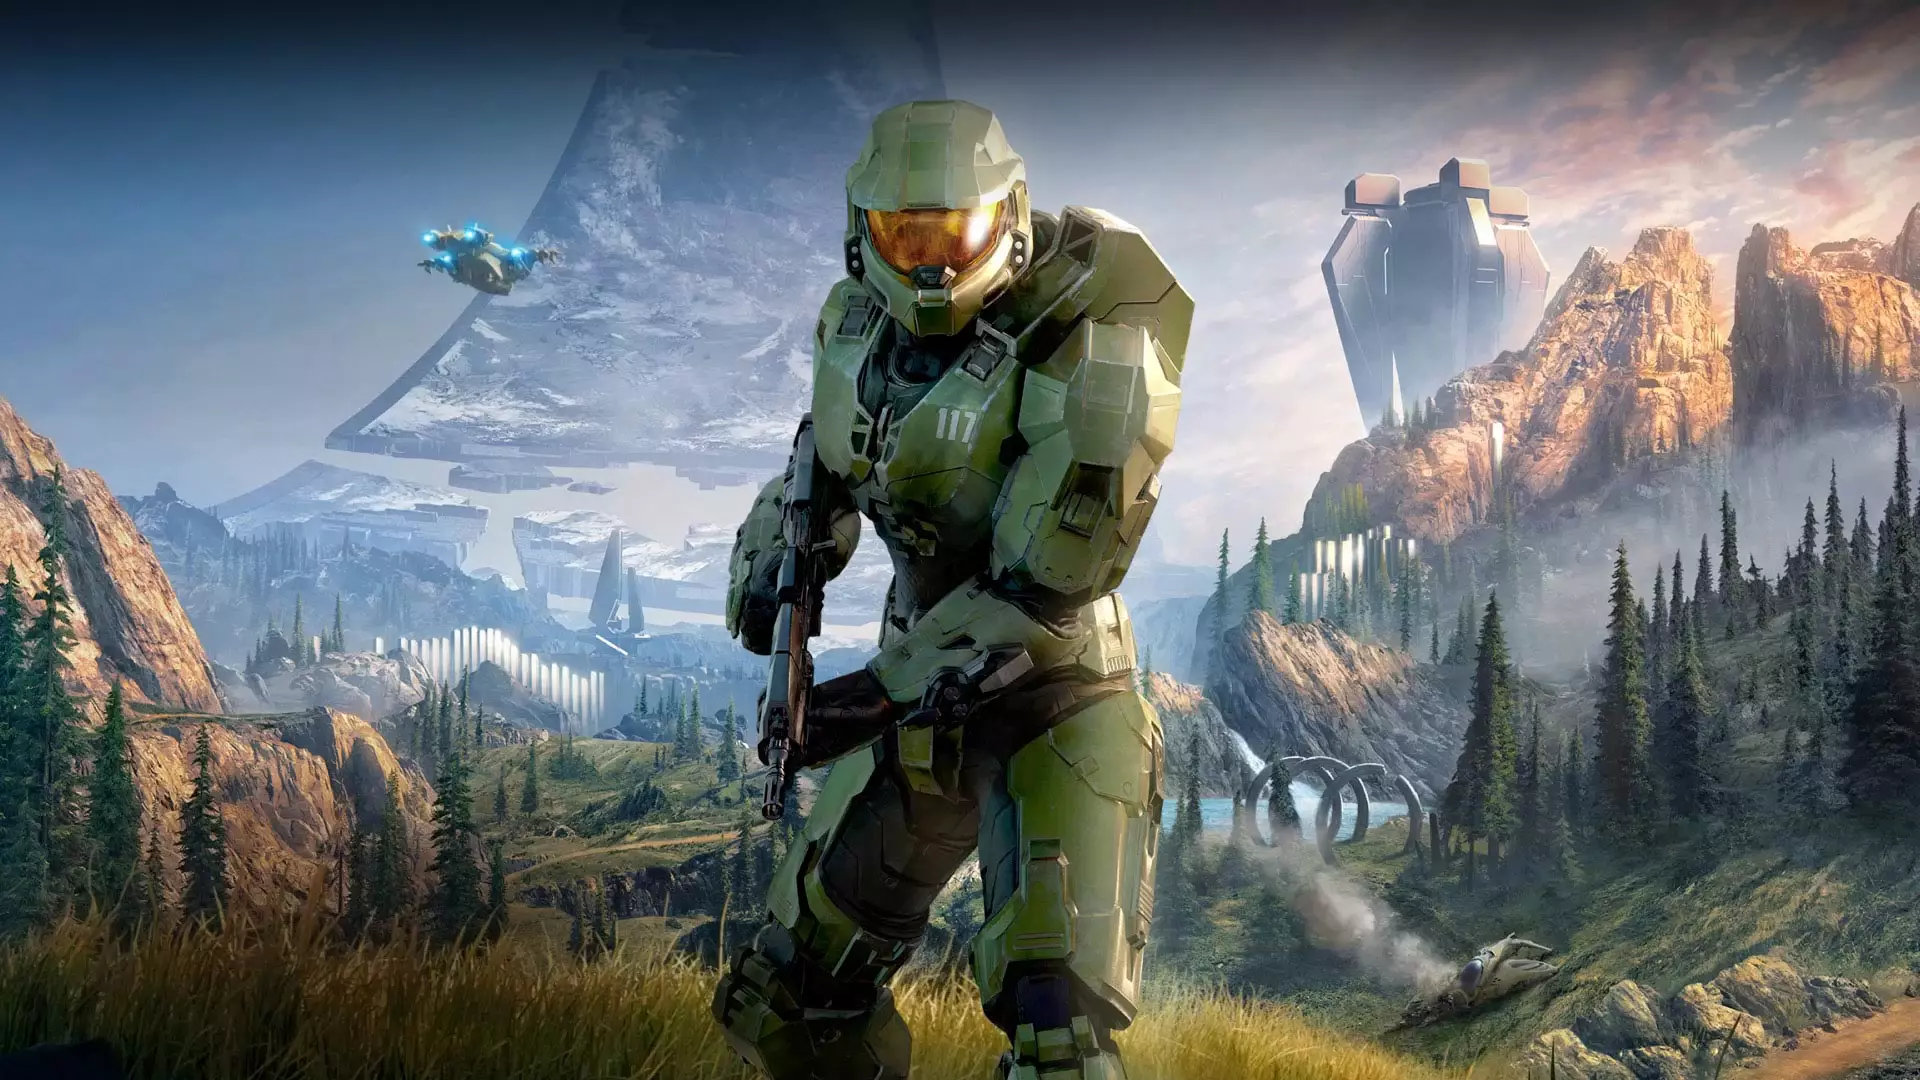 After its disappointing showcase in July 2020, expect Halo Infinite to get a lot of time at the Xbox/Bethesda event (